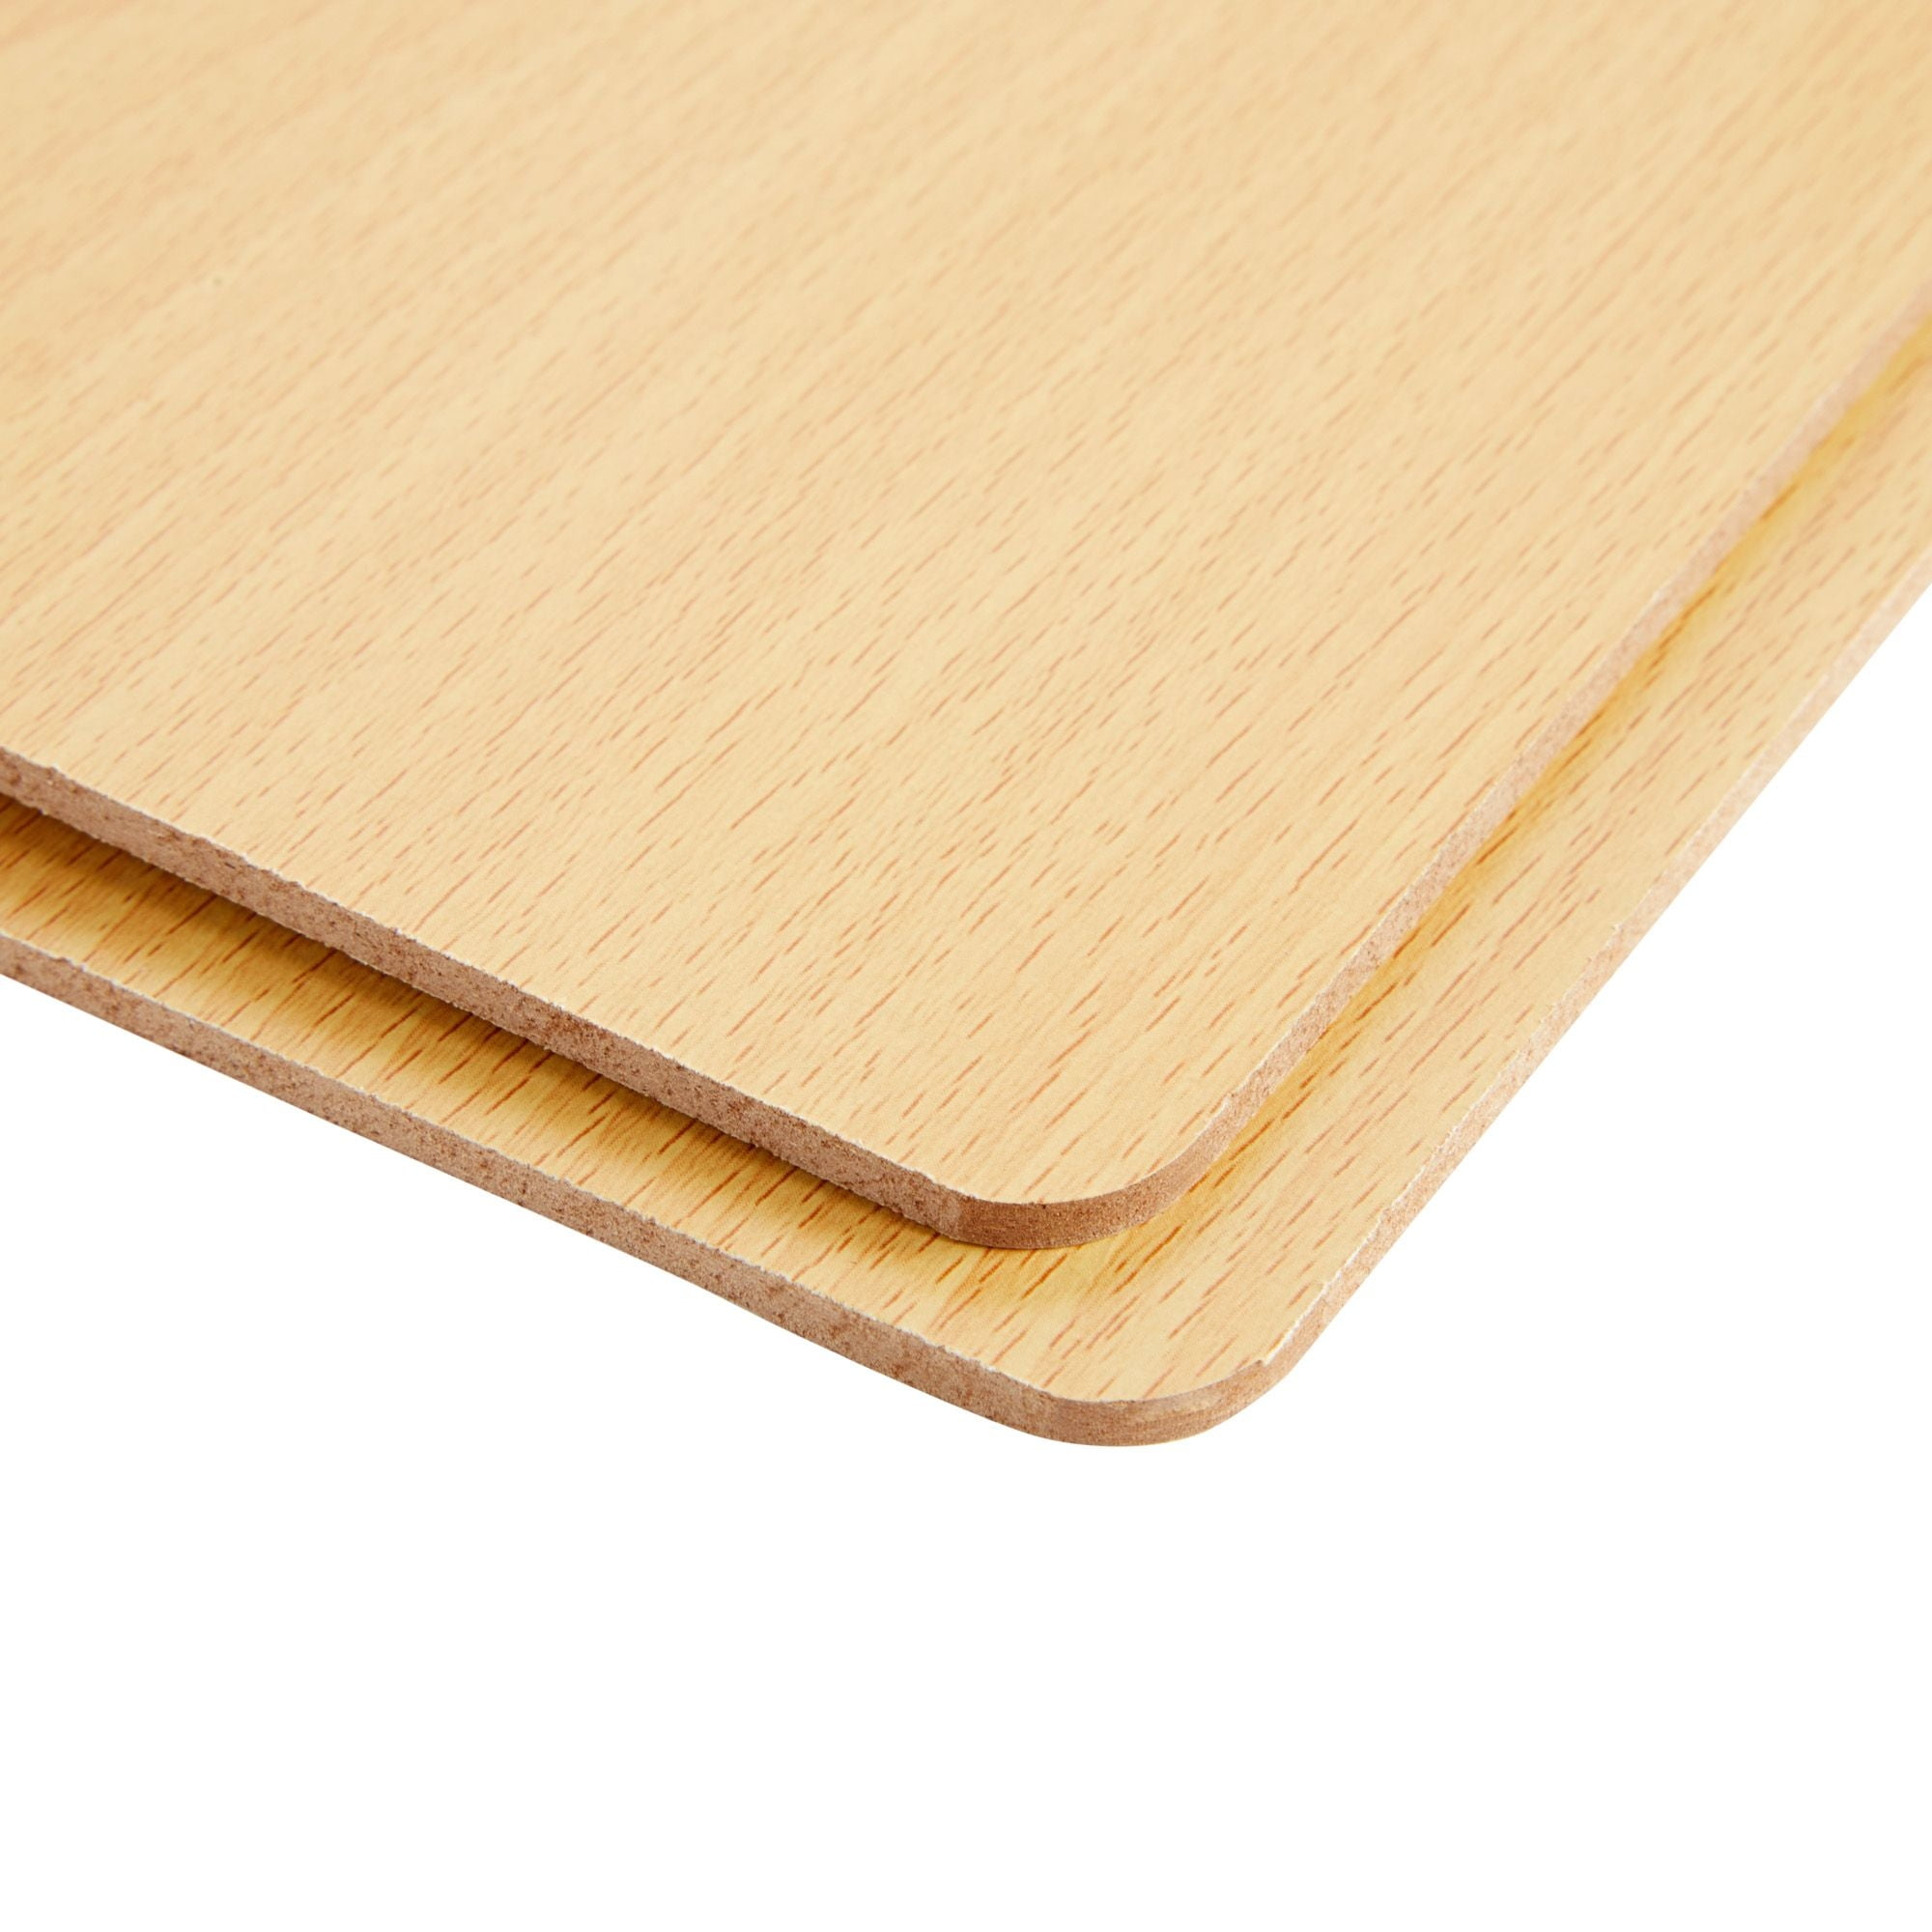 Tenceur 11x17 Clipboard Three Clip Tough Extra Large Clipboard Wooden  Horizontal Clipboard 11x17 Drawing Clipboard for School Office Home  Students